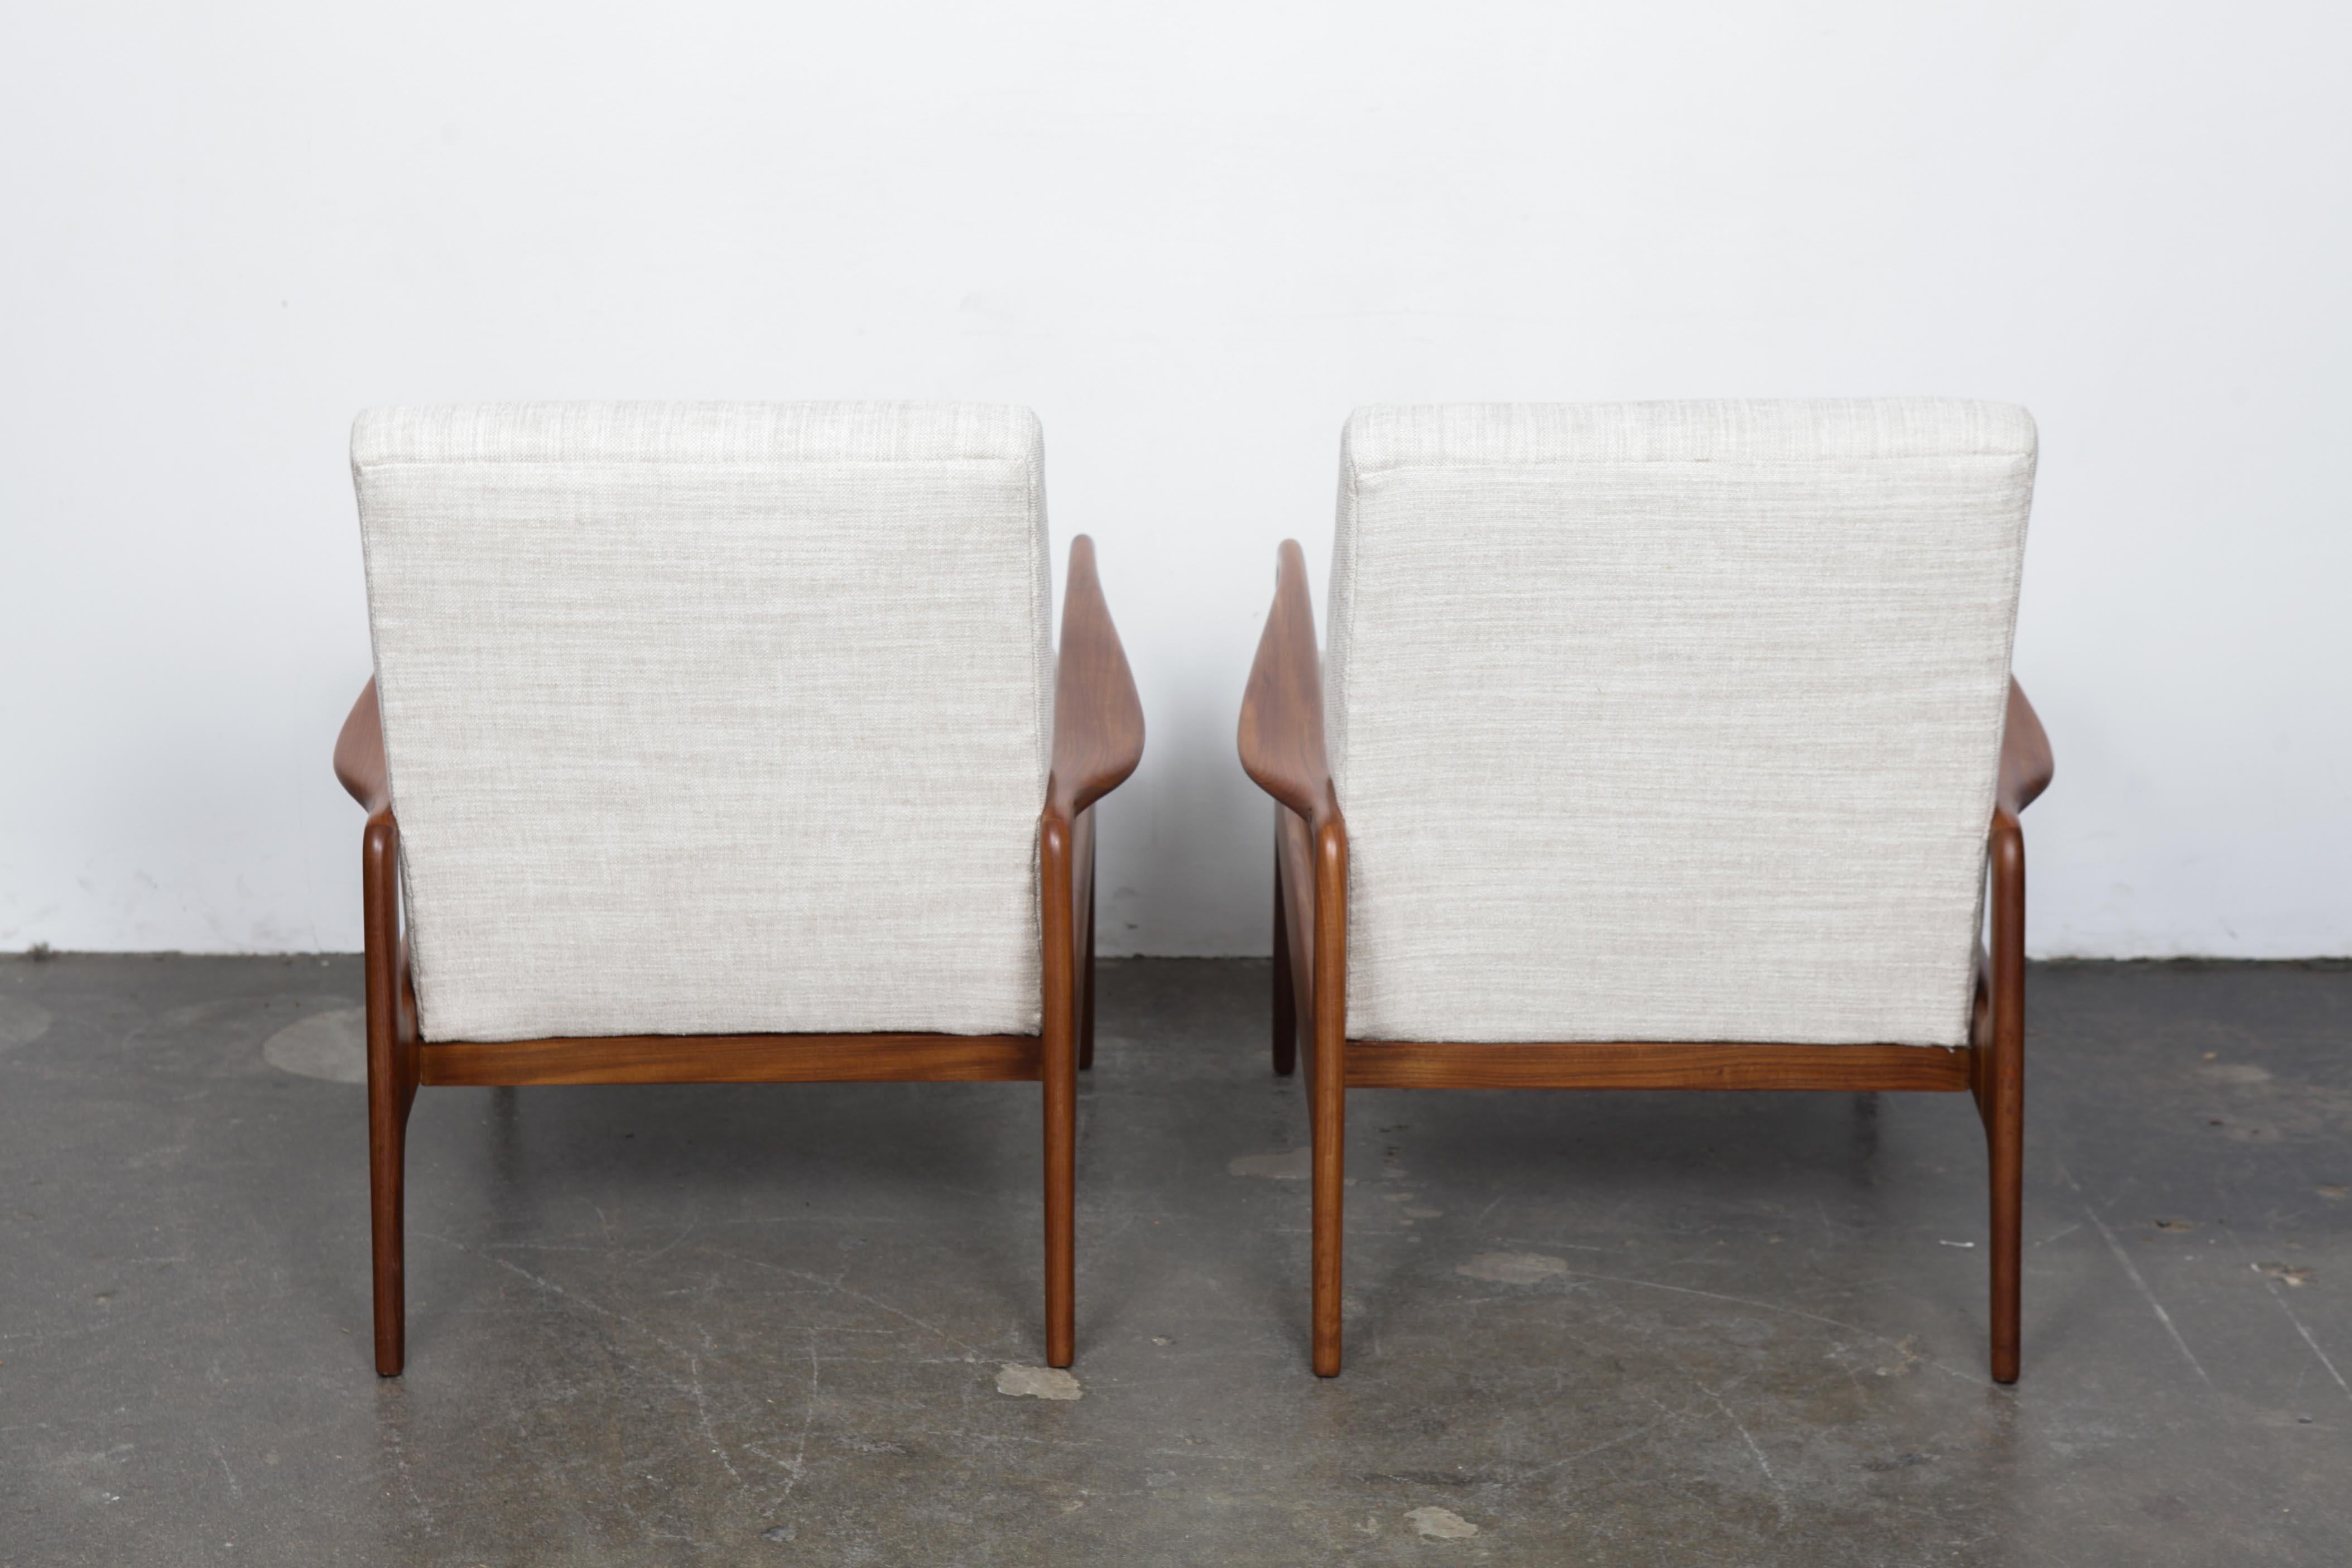 English Pair of Solid Afromoisa Teak Lounge Chairs by Greaves and Thomas, England